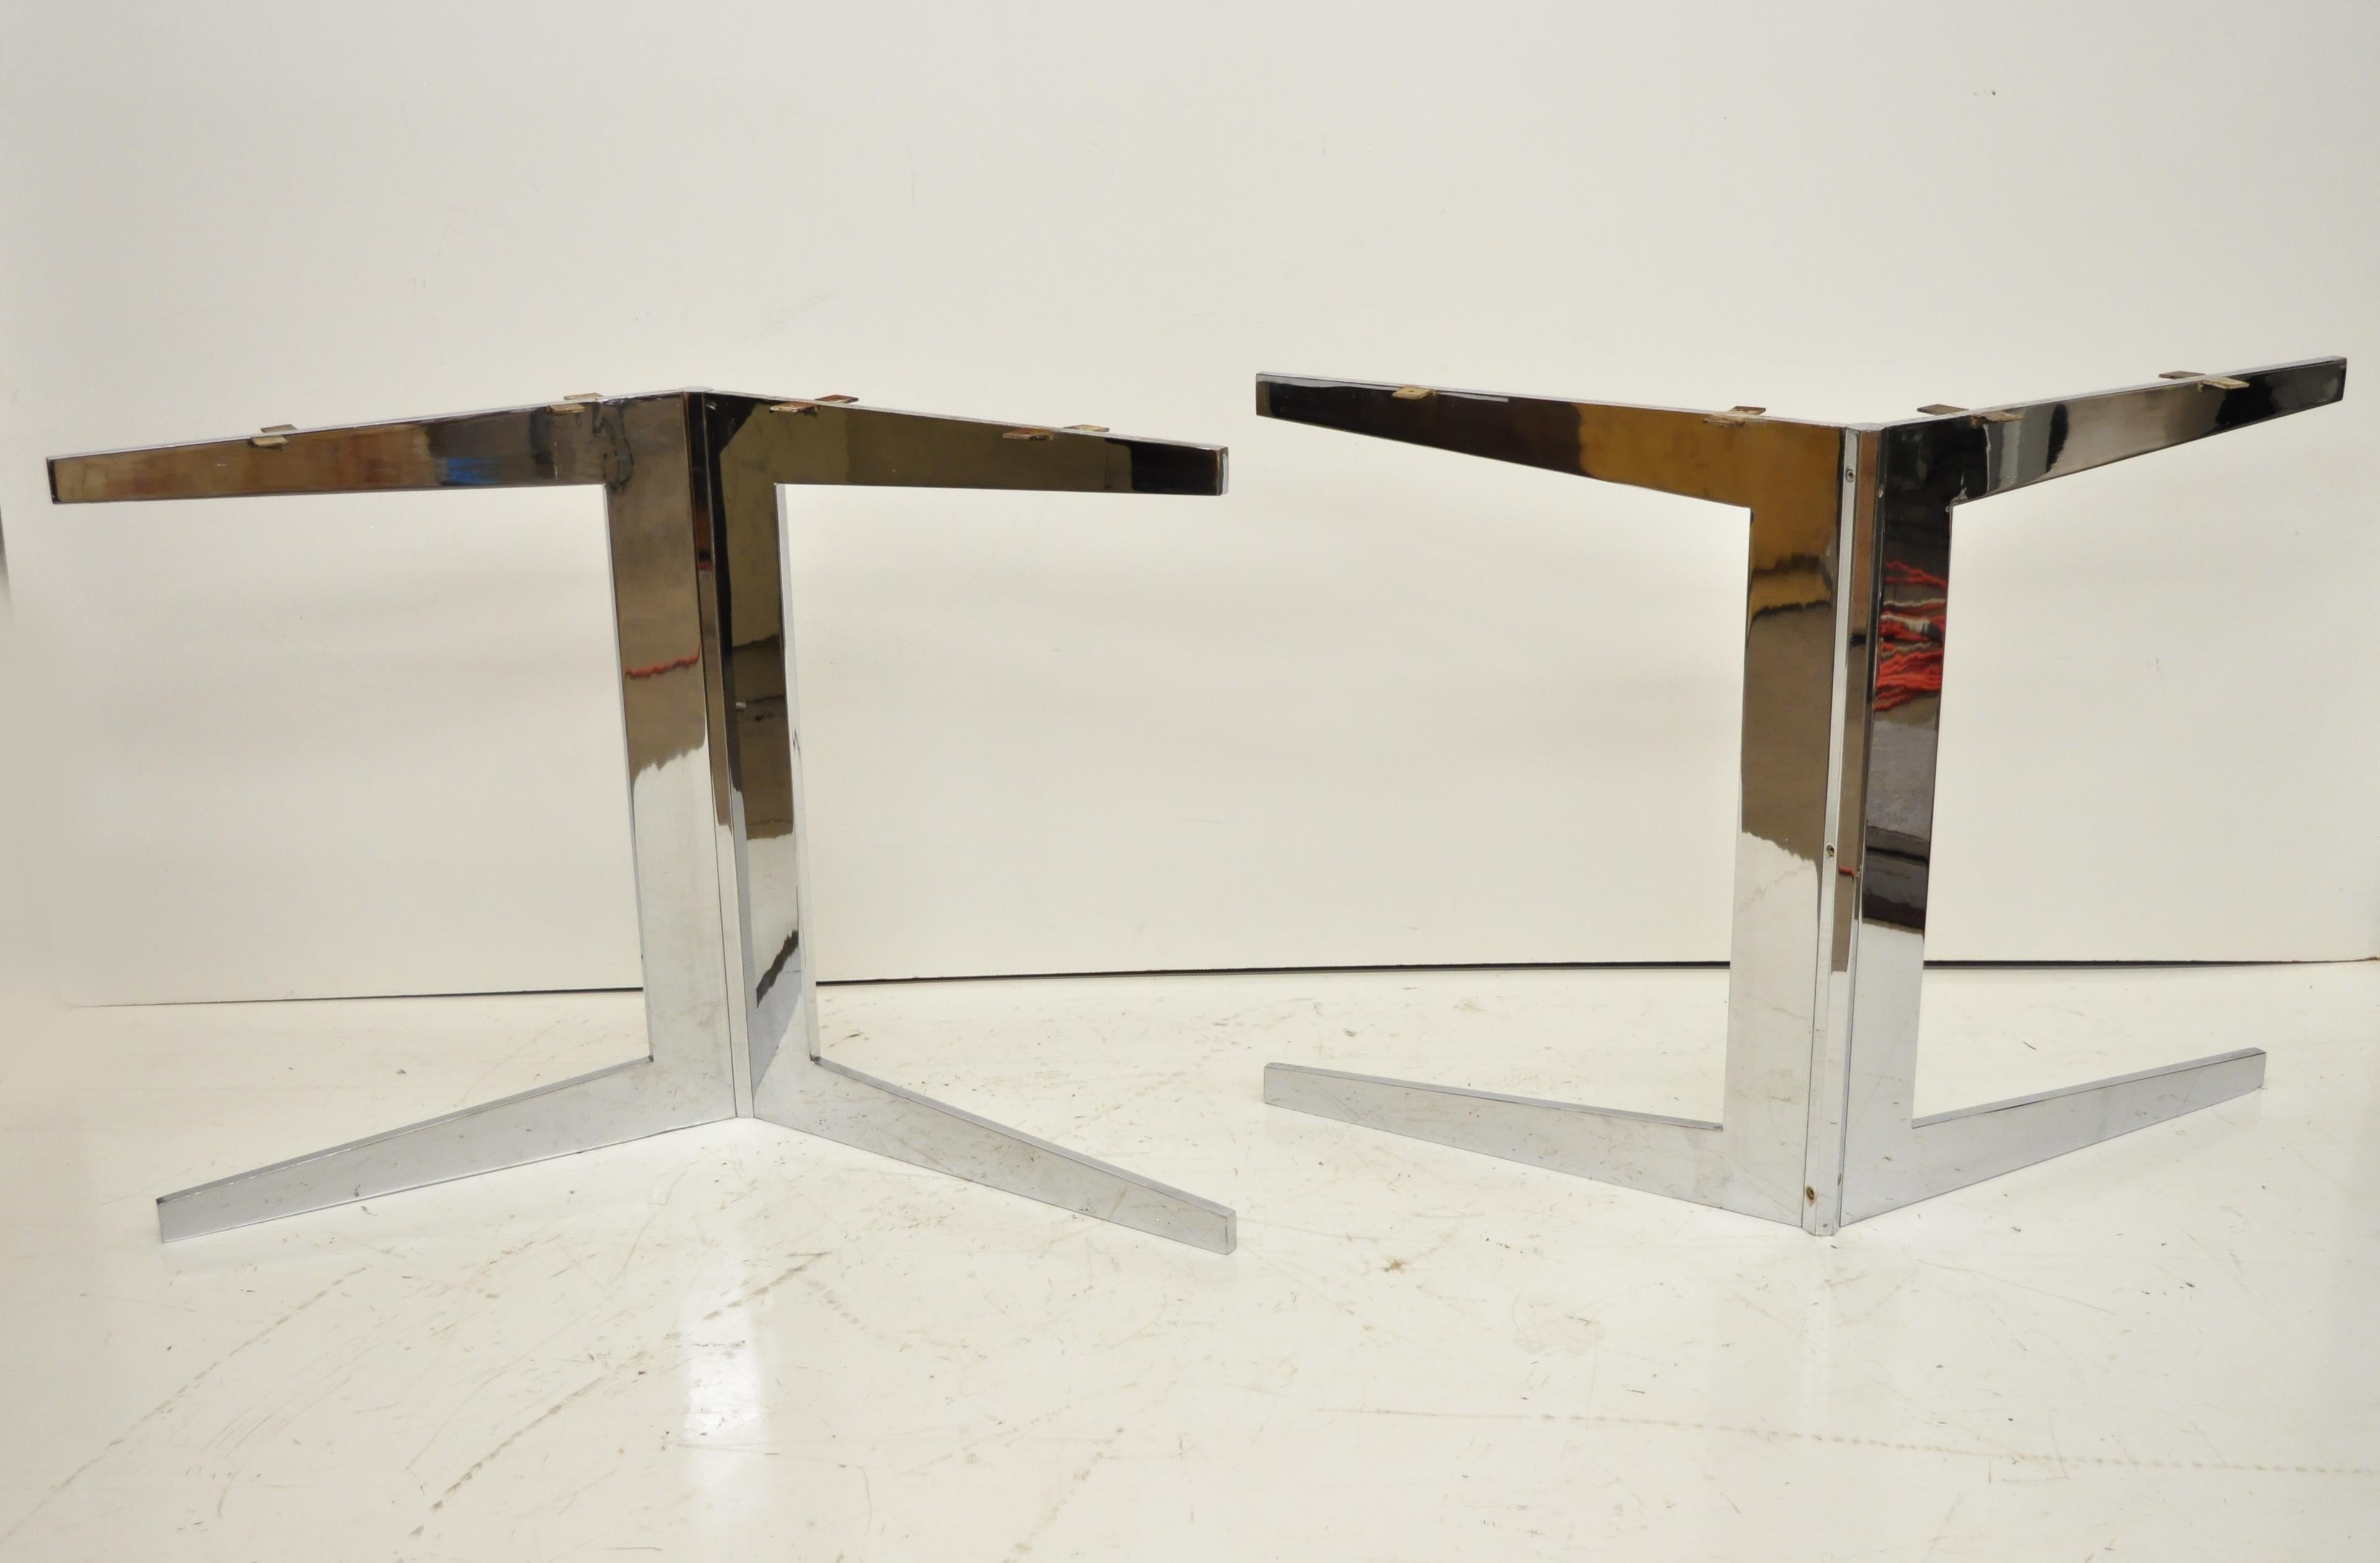 Mid Century Modern Chrome Plated Steel Double Star Pedestal Dining Table Bases in the Florence Knoll Style (2 Pieces). Item features chrome-plated steel pedestal bases, foot levelers, 65 lbs. each, and sleek sculptural form, circa mid-20th century.